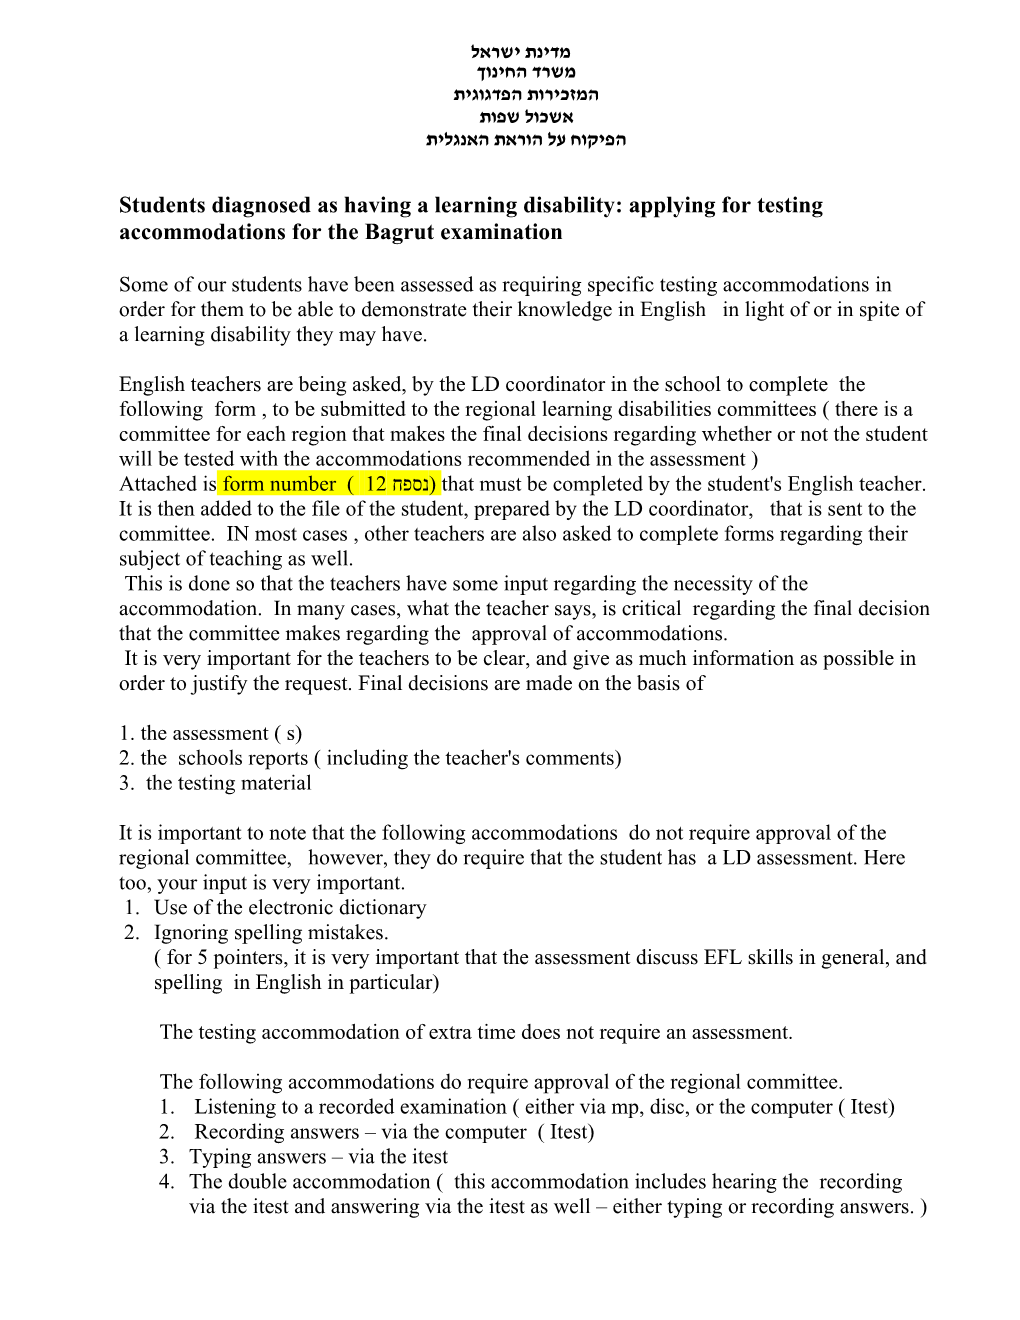 Students Diagnosed As Having a Learning Disability: Applying for Testing Accommodations